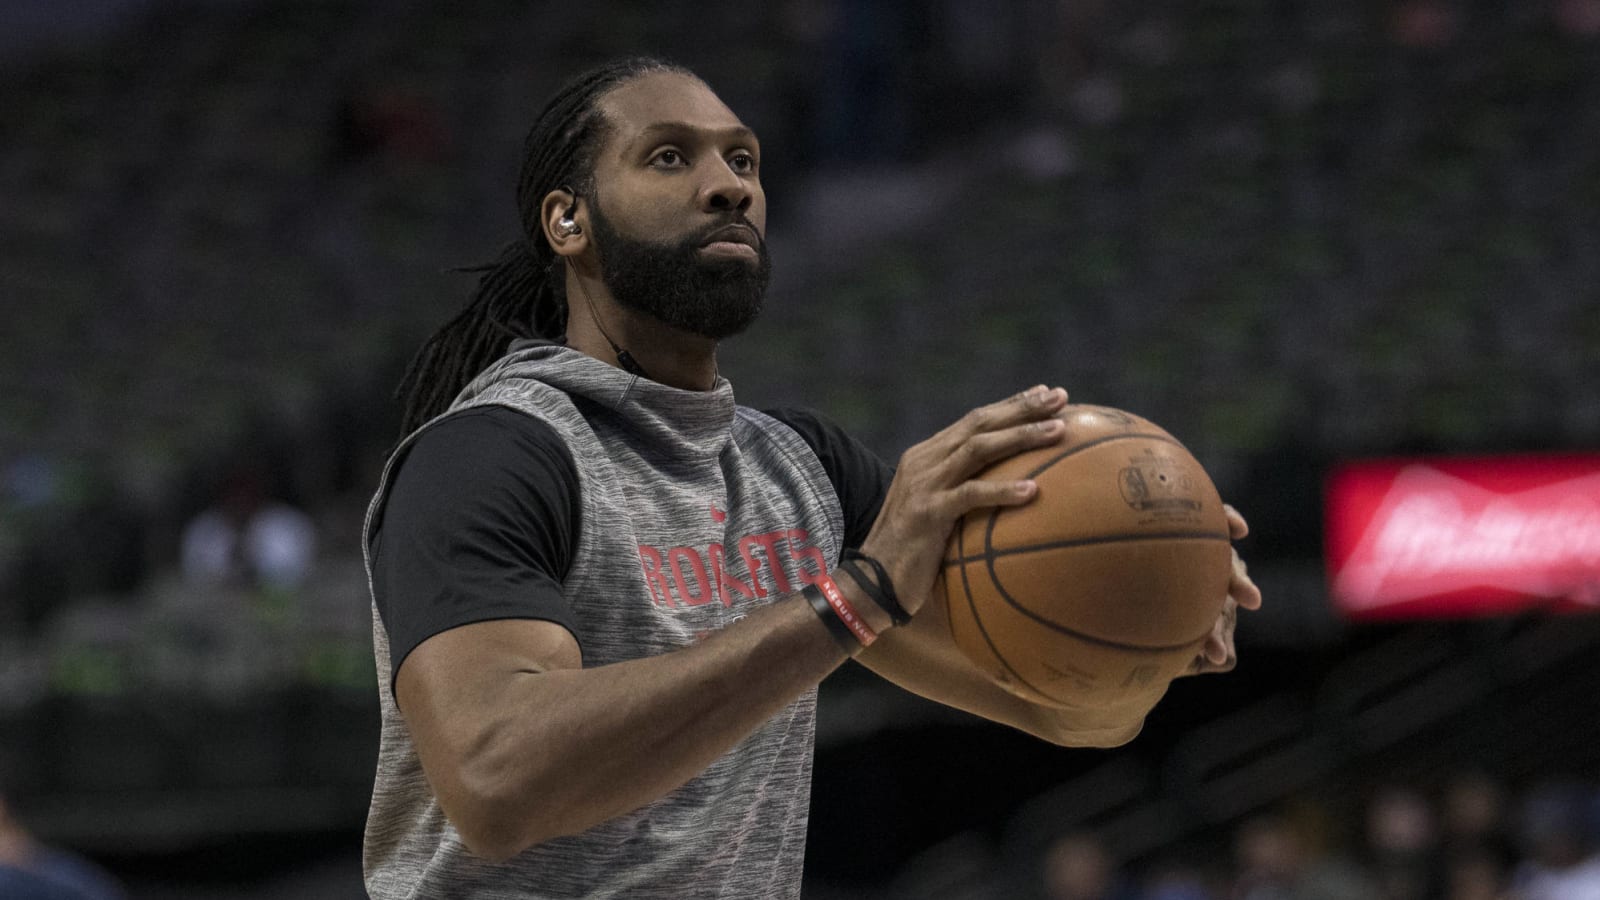 Hawks officially request waivers on Nene